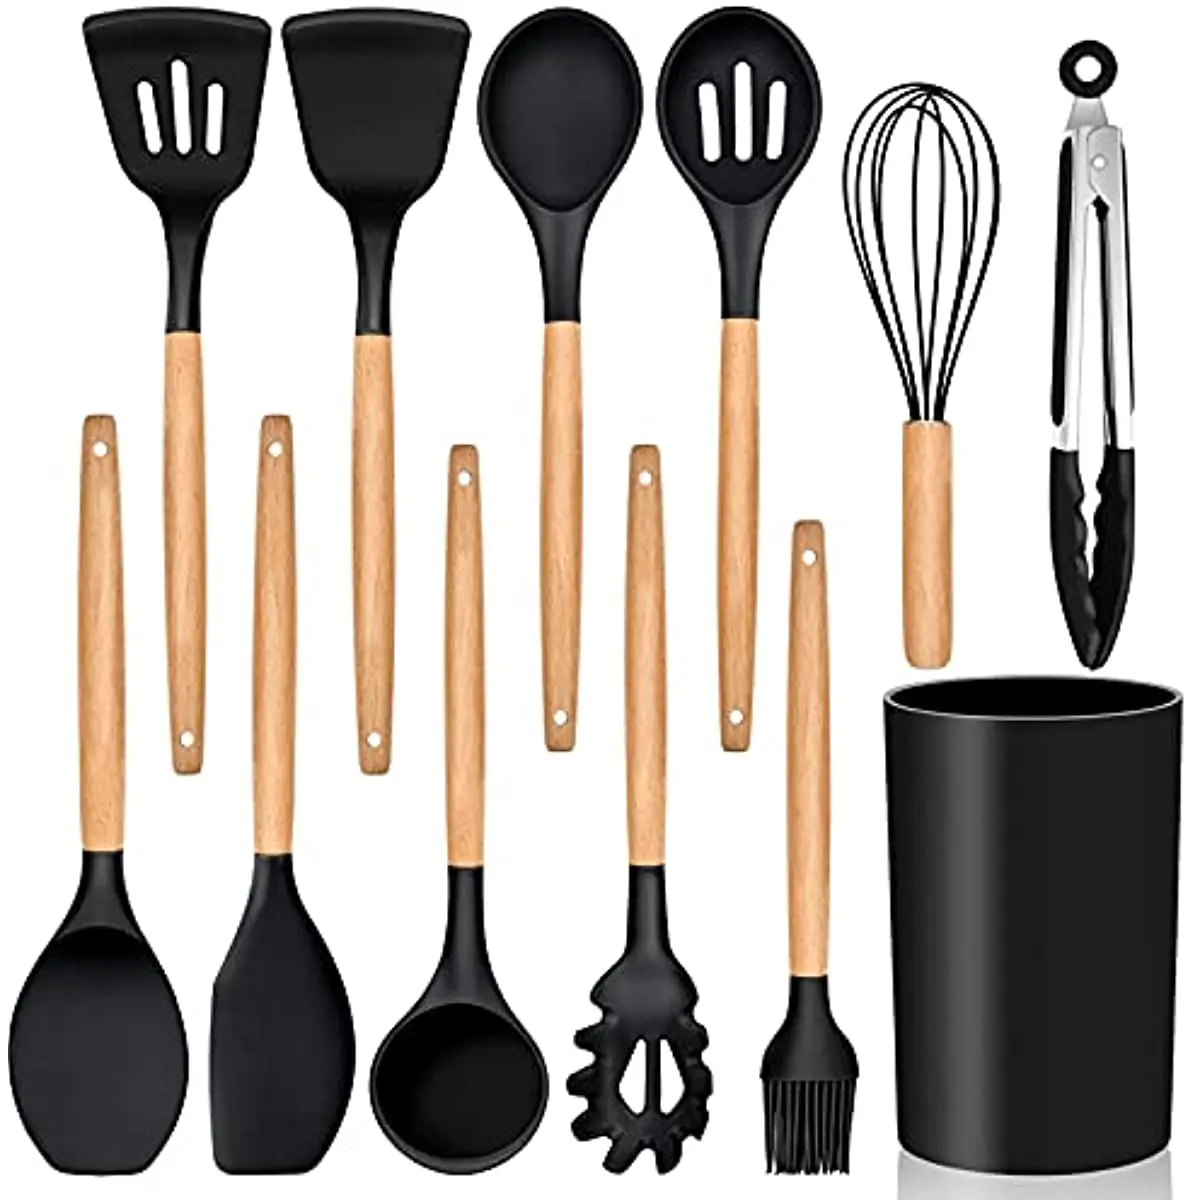 12pcs Wooden Handle Silicone Kitchen Utensils Cooking Non-stick Pan Storage  Bucket Egg Whisk Hot Mix Stir-Fry Cookware Set